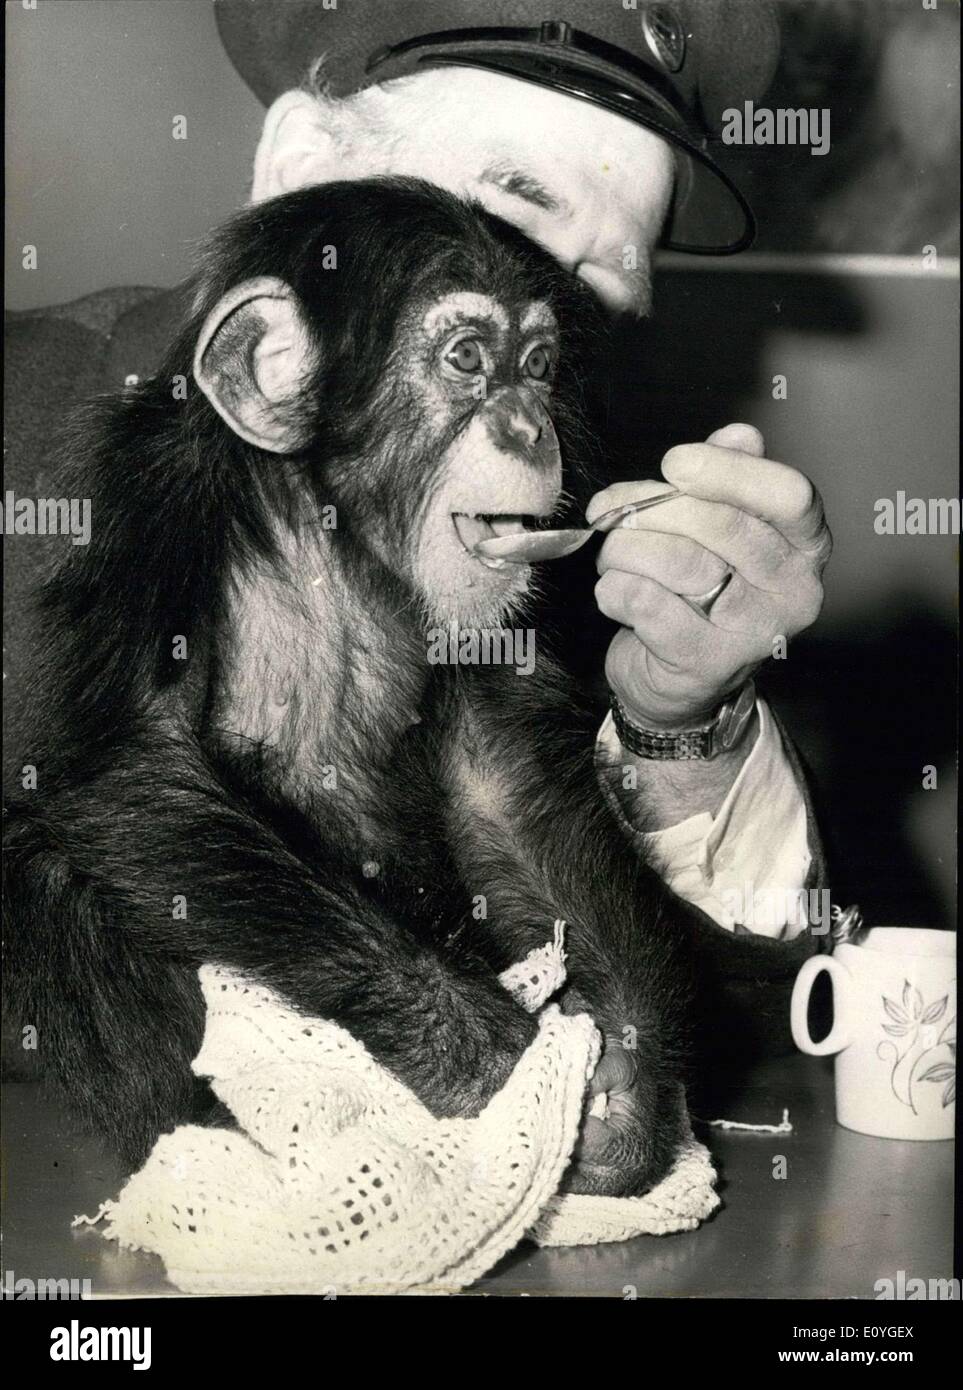 Apr. 08, 1970 - Cameron the Chimpanzee meets his public.: 'Cameron' the chimpanzee, meets his public for the first time today at the London zoo. Deserted by his mother Fifi, on the day he was born, seven-months old Cameron was hand-reared by Mrs. Patricia Brambell, wife of the Curator of Mammals. For three months he shared the family life of the Brambell household, having four-hourly feeds like any human baby. At three months Cameron went to nursery school, in the Monkey House where also being looked after by the Monkey House Keepers Stock Photo